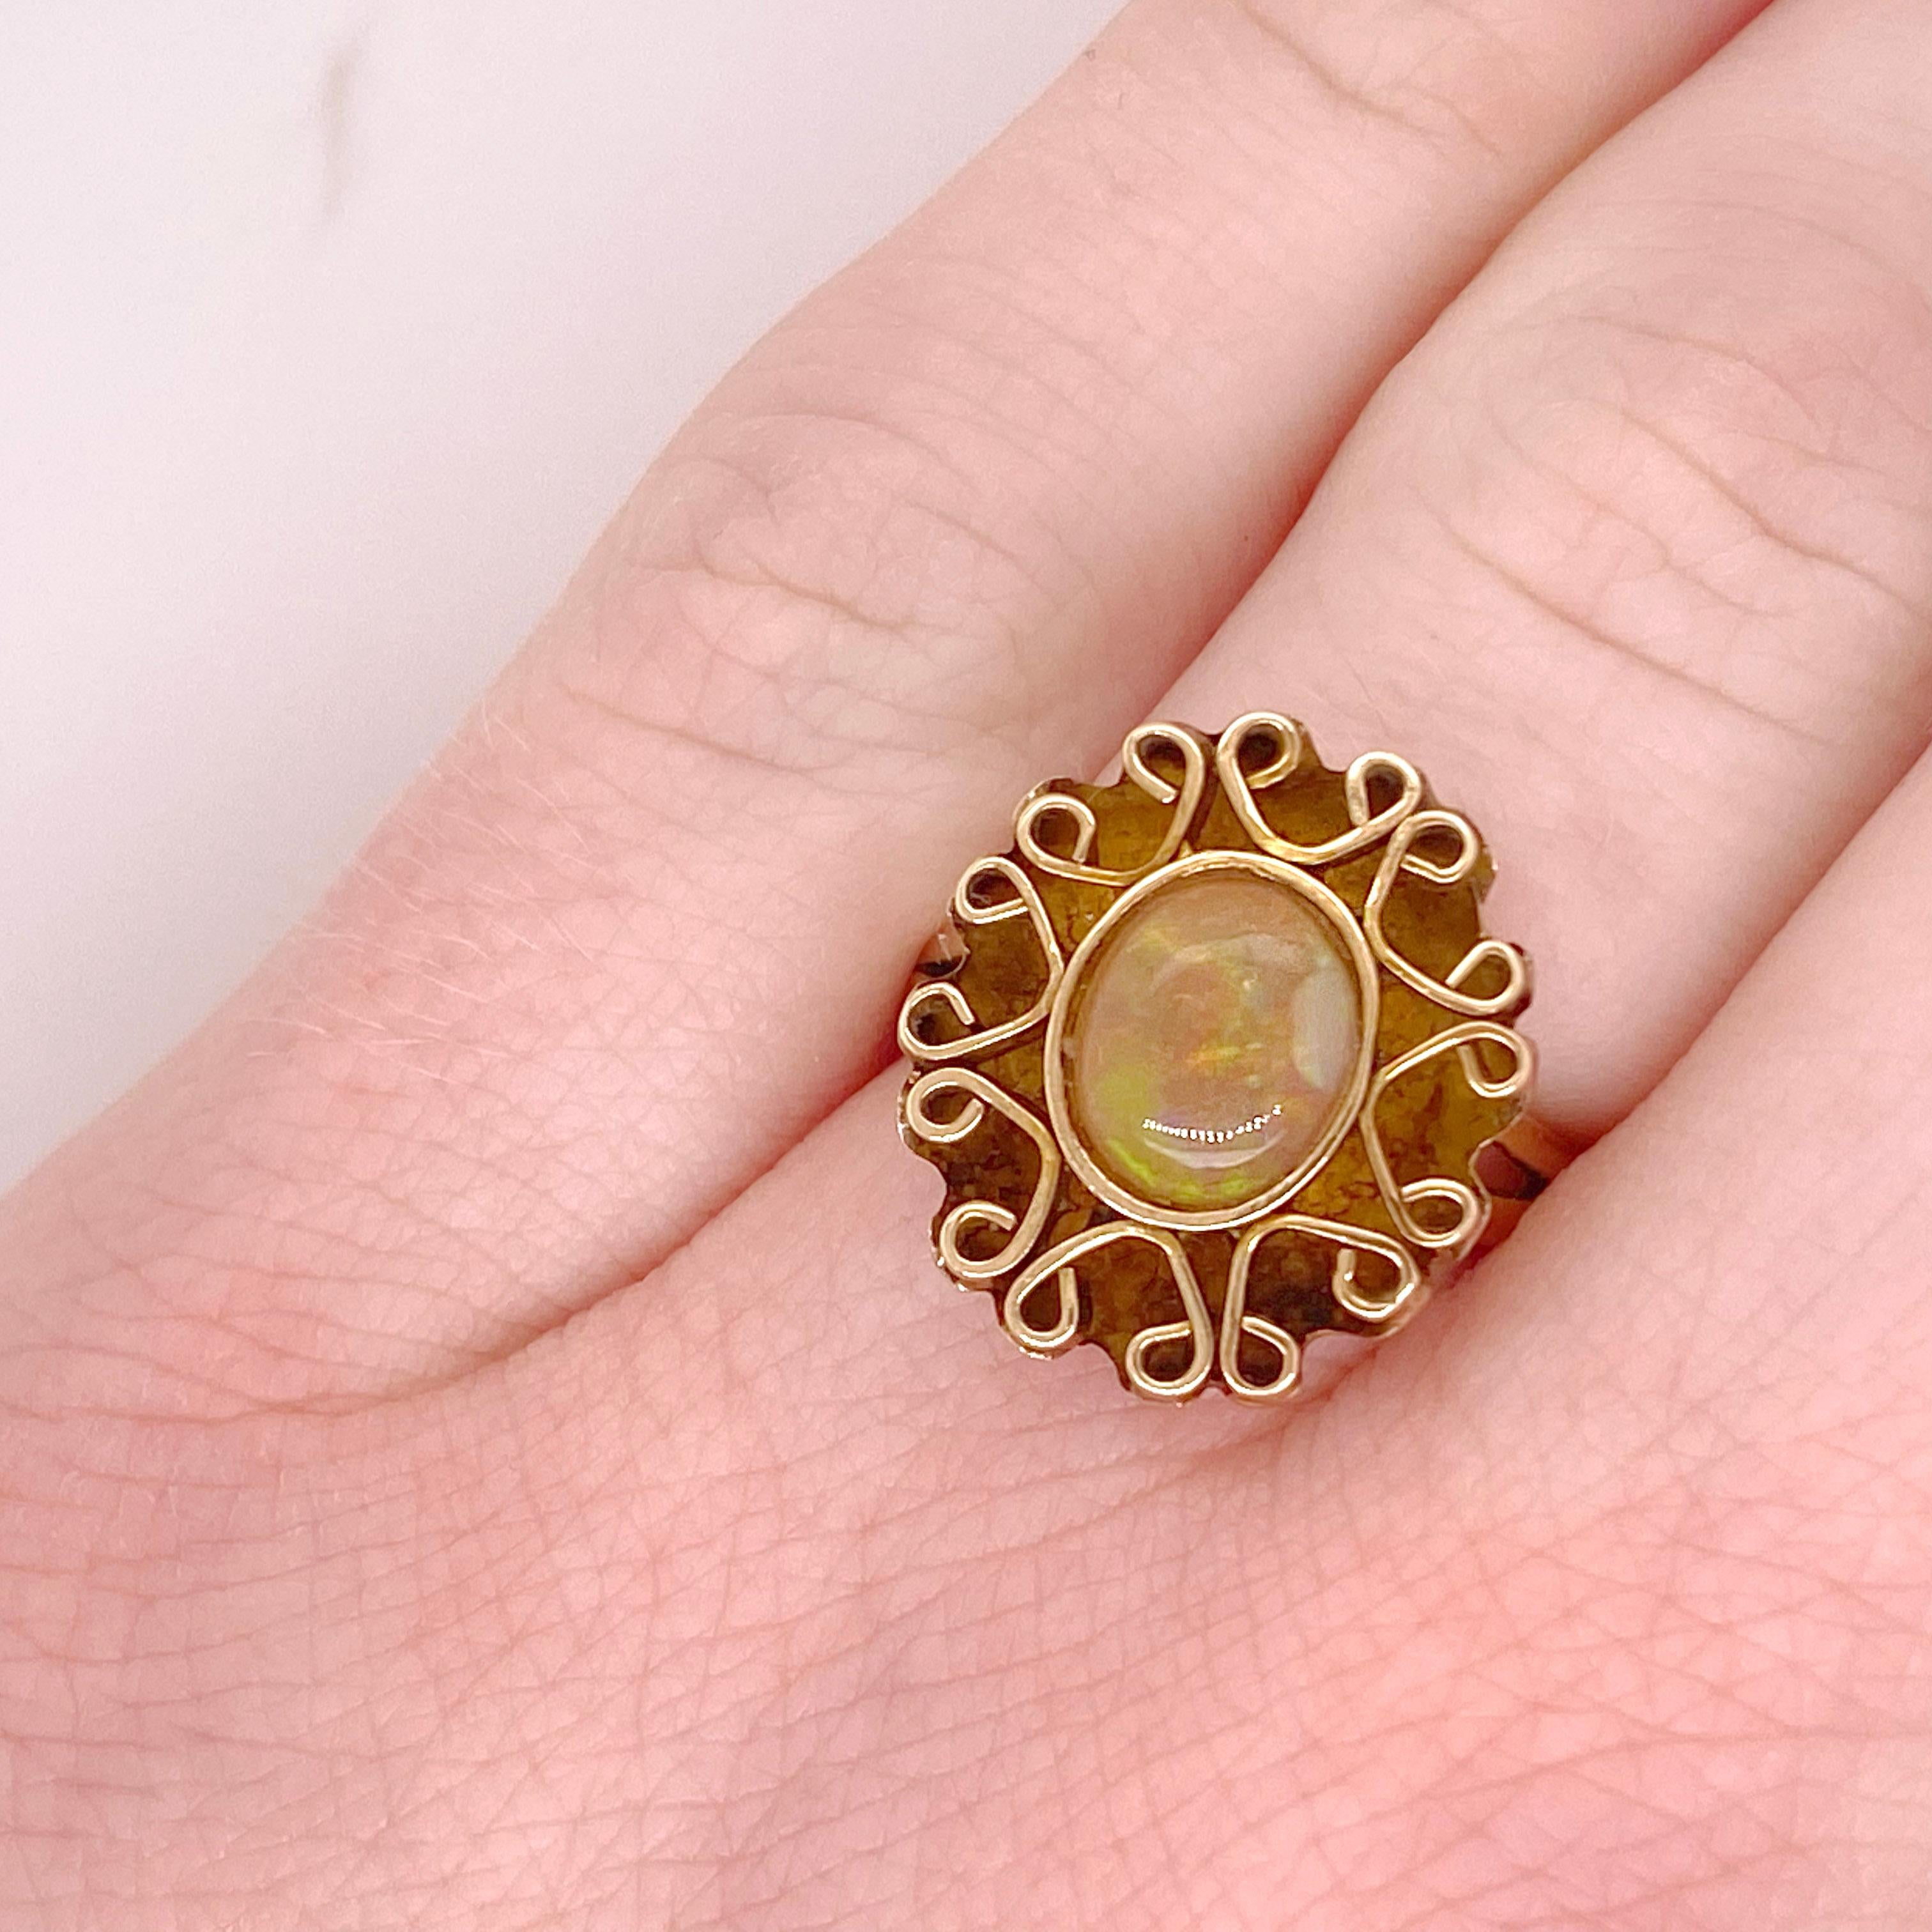 Opals are one of our favorite stones because they contain more than just one beautiful color. This ring is very high quality statement piece and is comfortable on the finger. The filigree surrounding the stone makes this ring even more special than